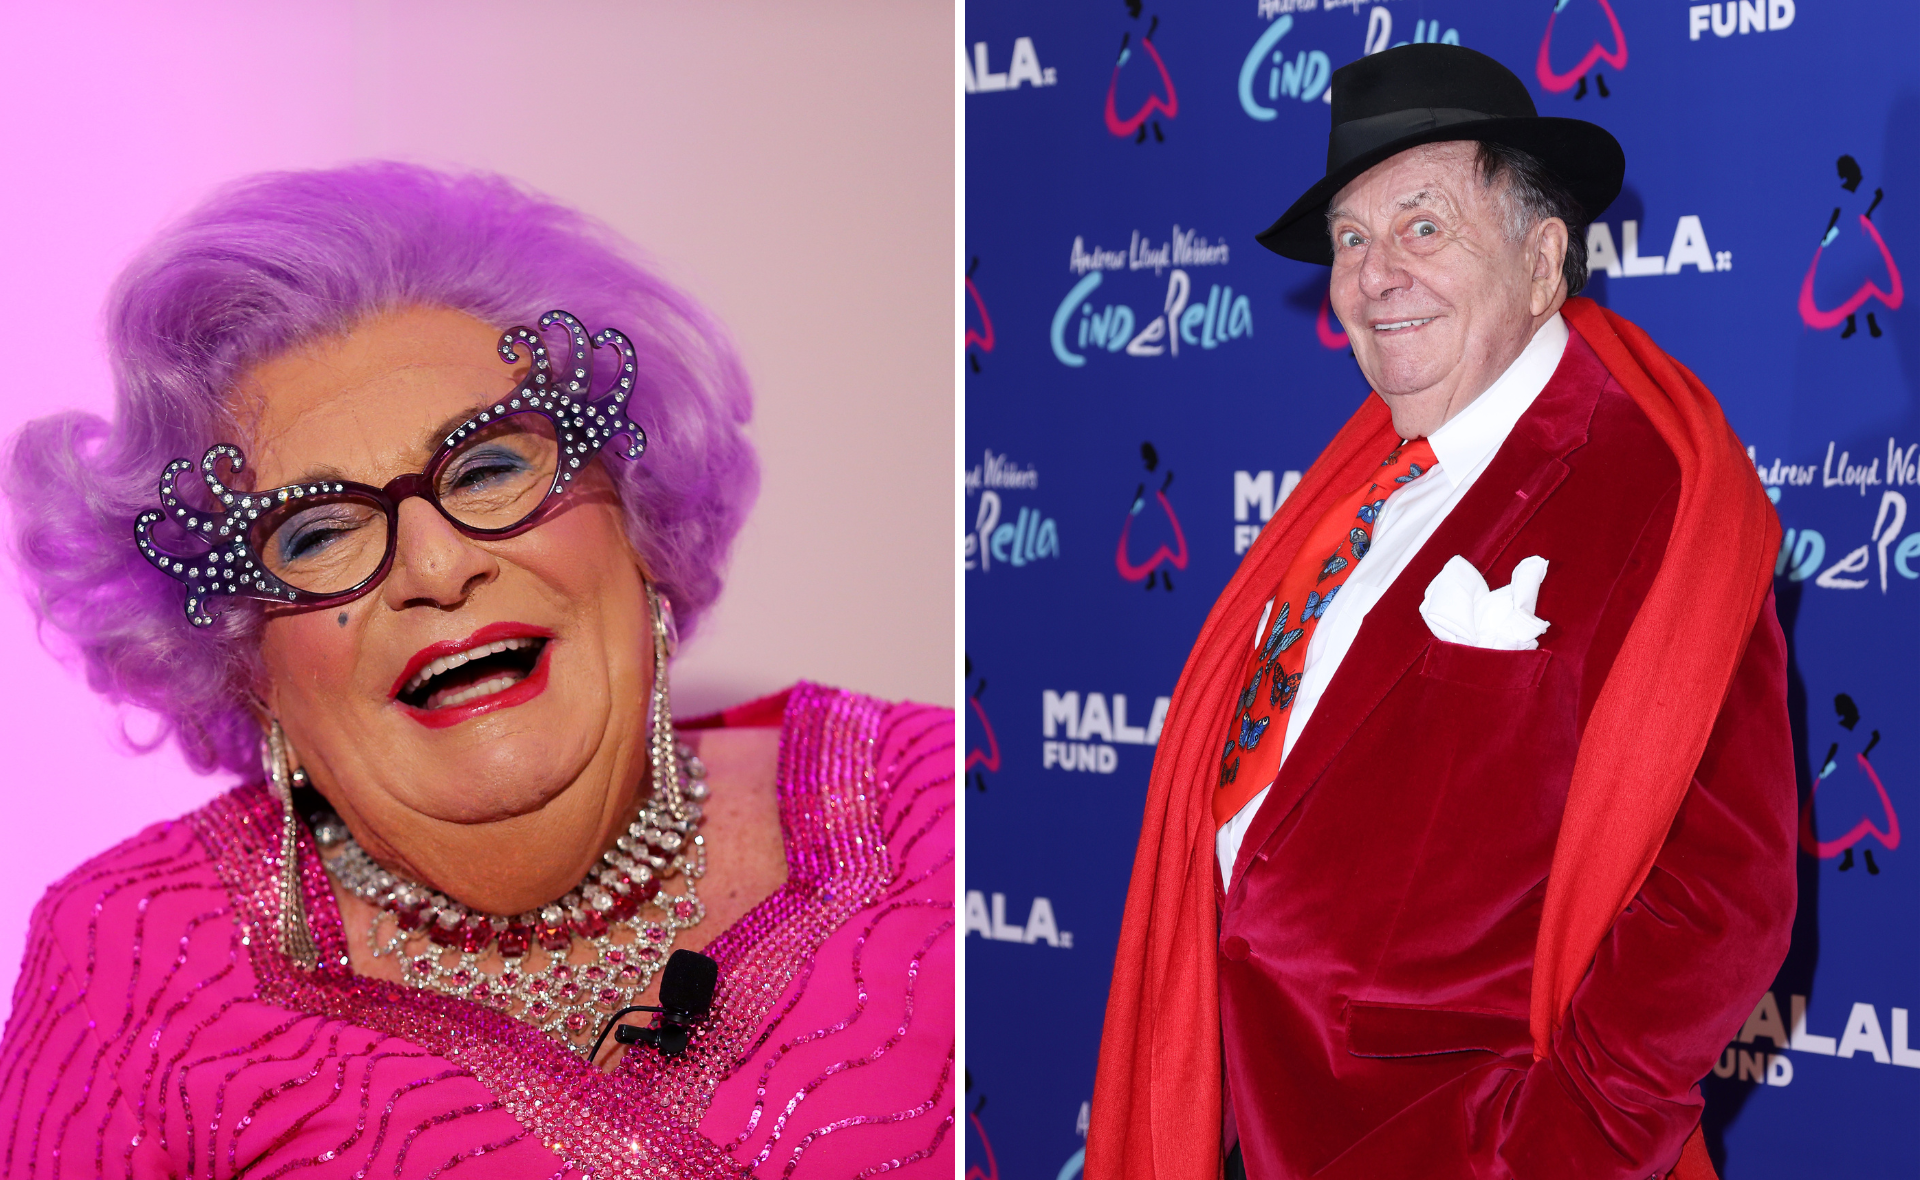 Beloved Aussie comedian Barry Humphries AKA Dame Edna rushed to hospital